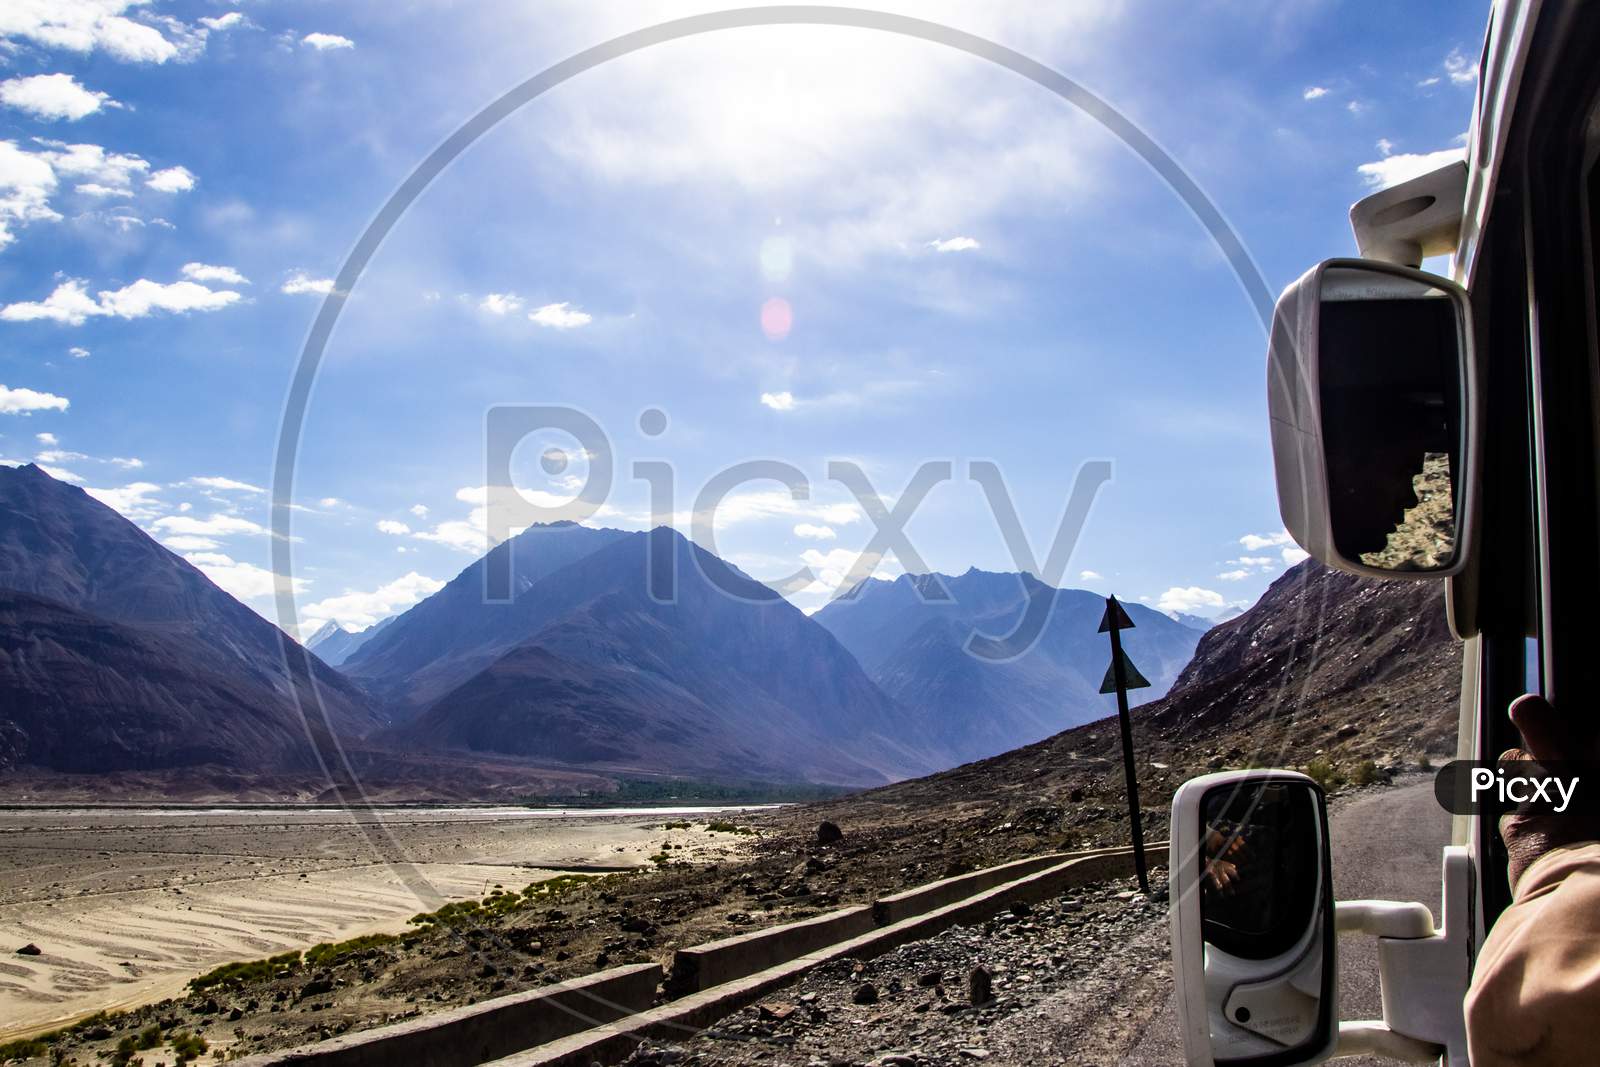 View Of Roads Of Ladakh Kashmir From Car Window While Travelling In A Car With Hills And Blue Sky.